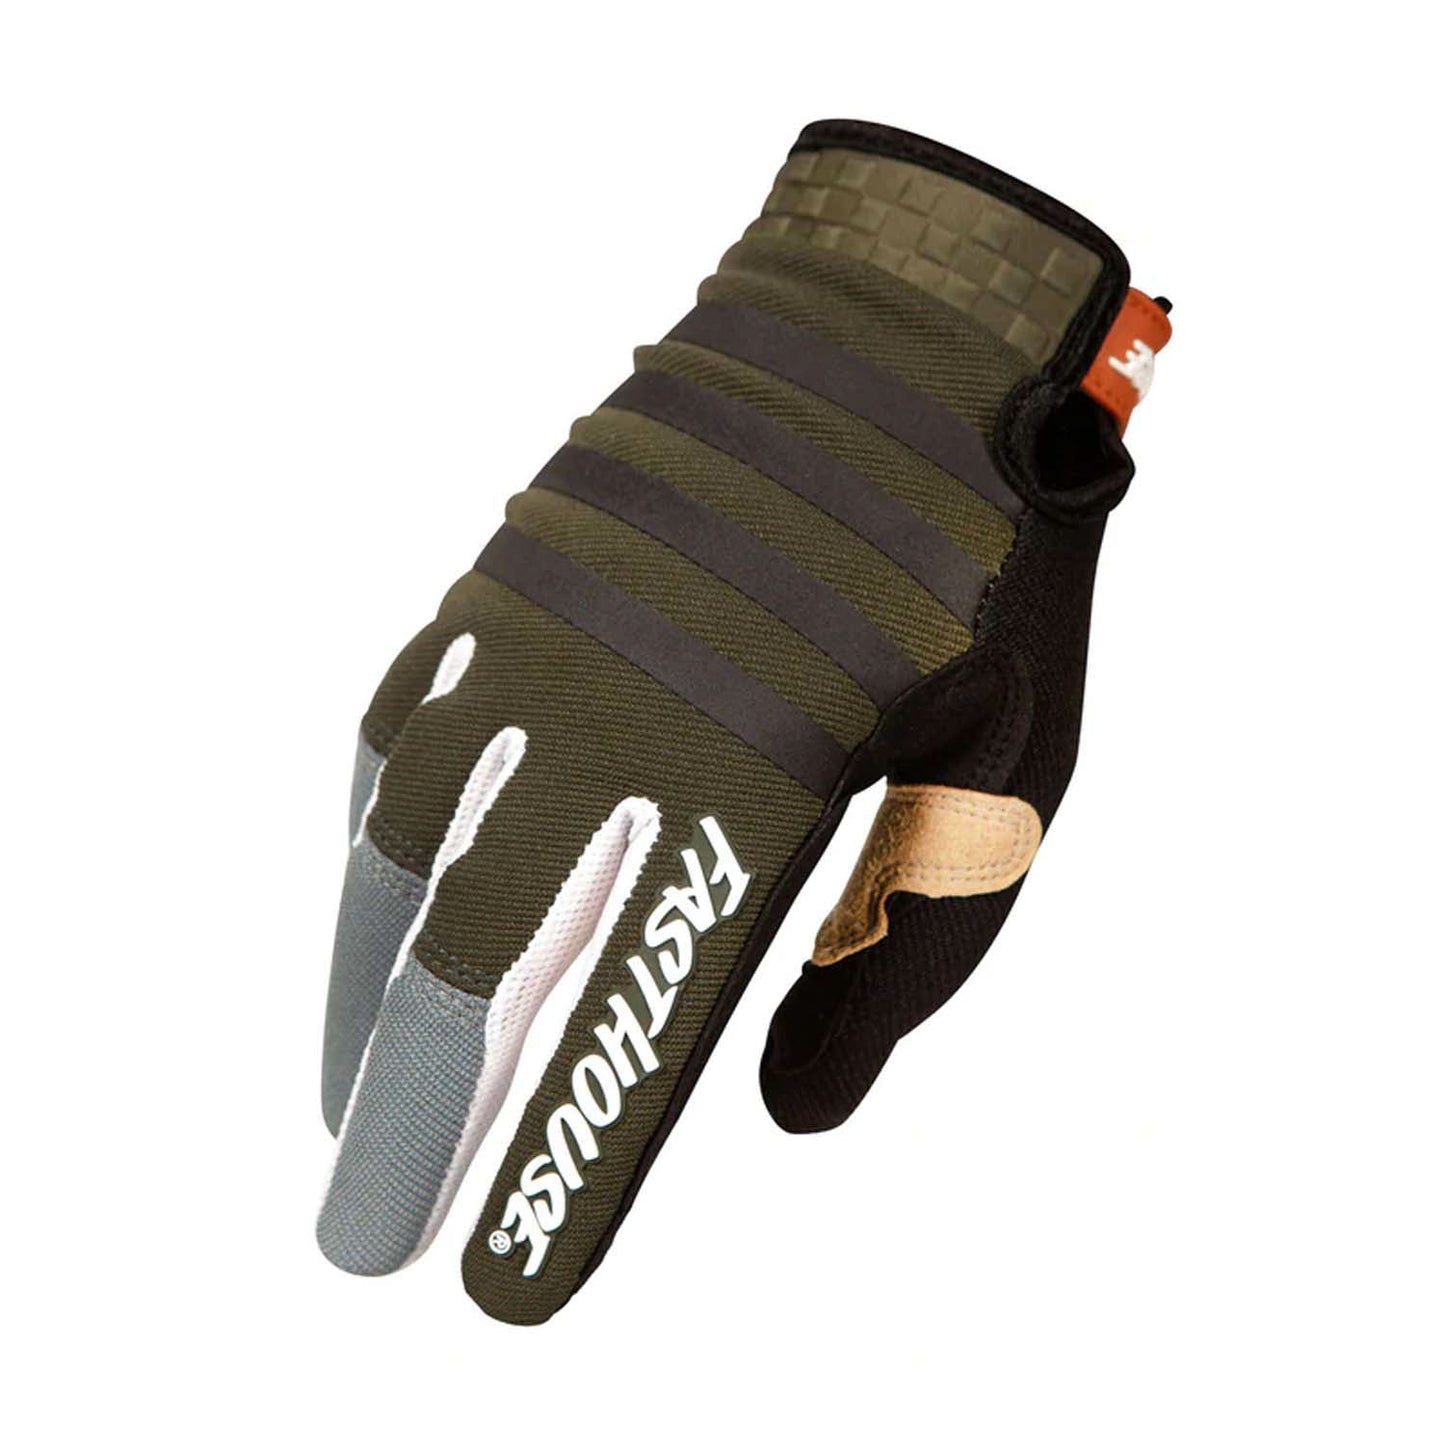 Fasthouse Speed Style Glove - Sale Striper - Olive Charcoal S Bike Gloves